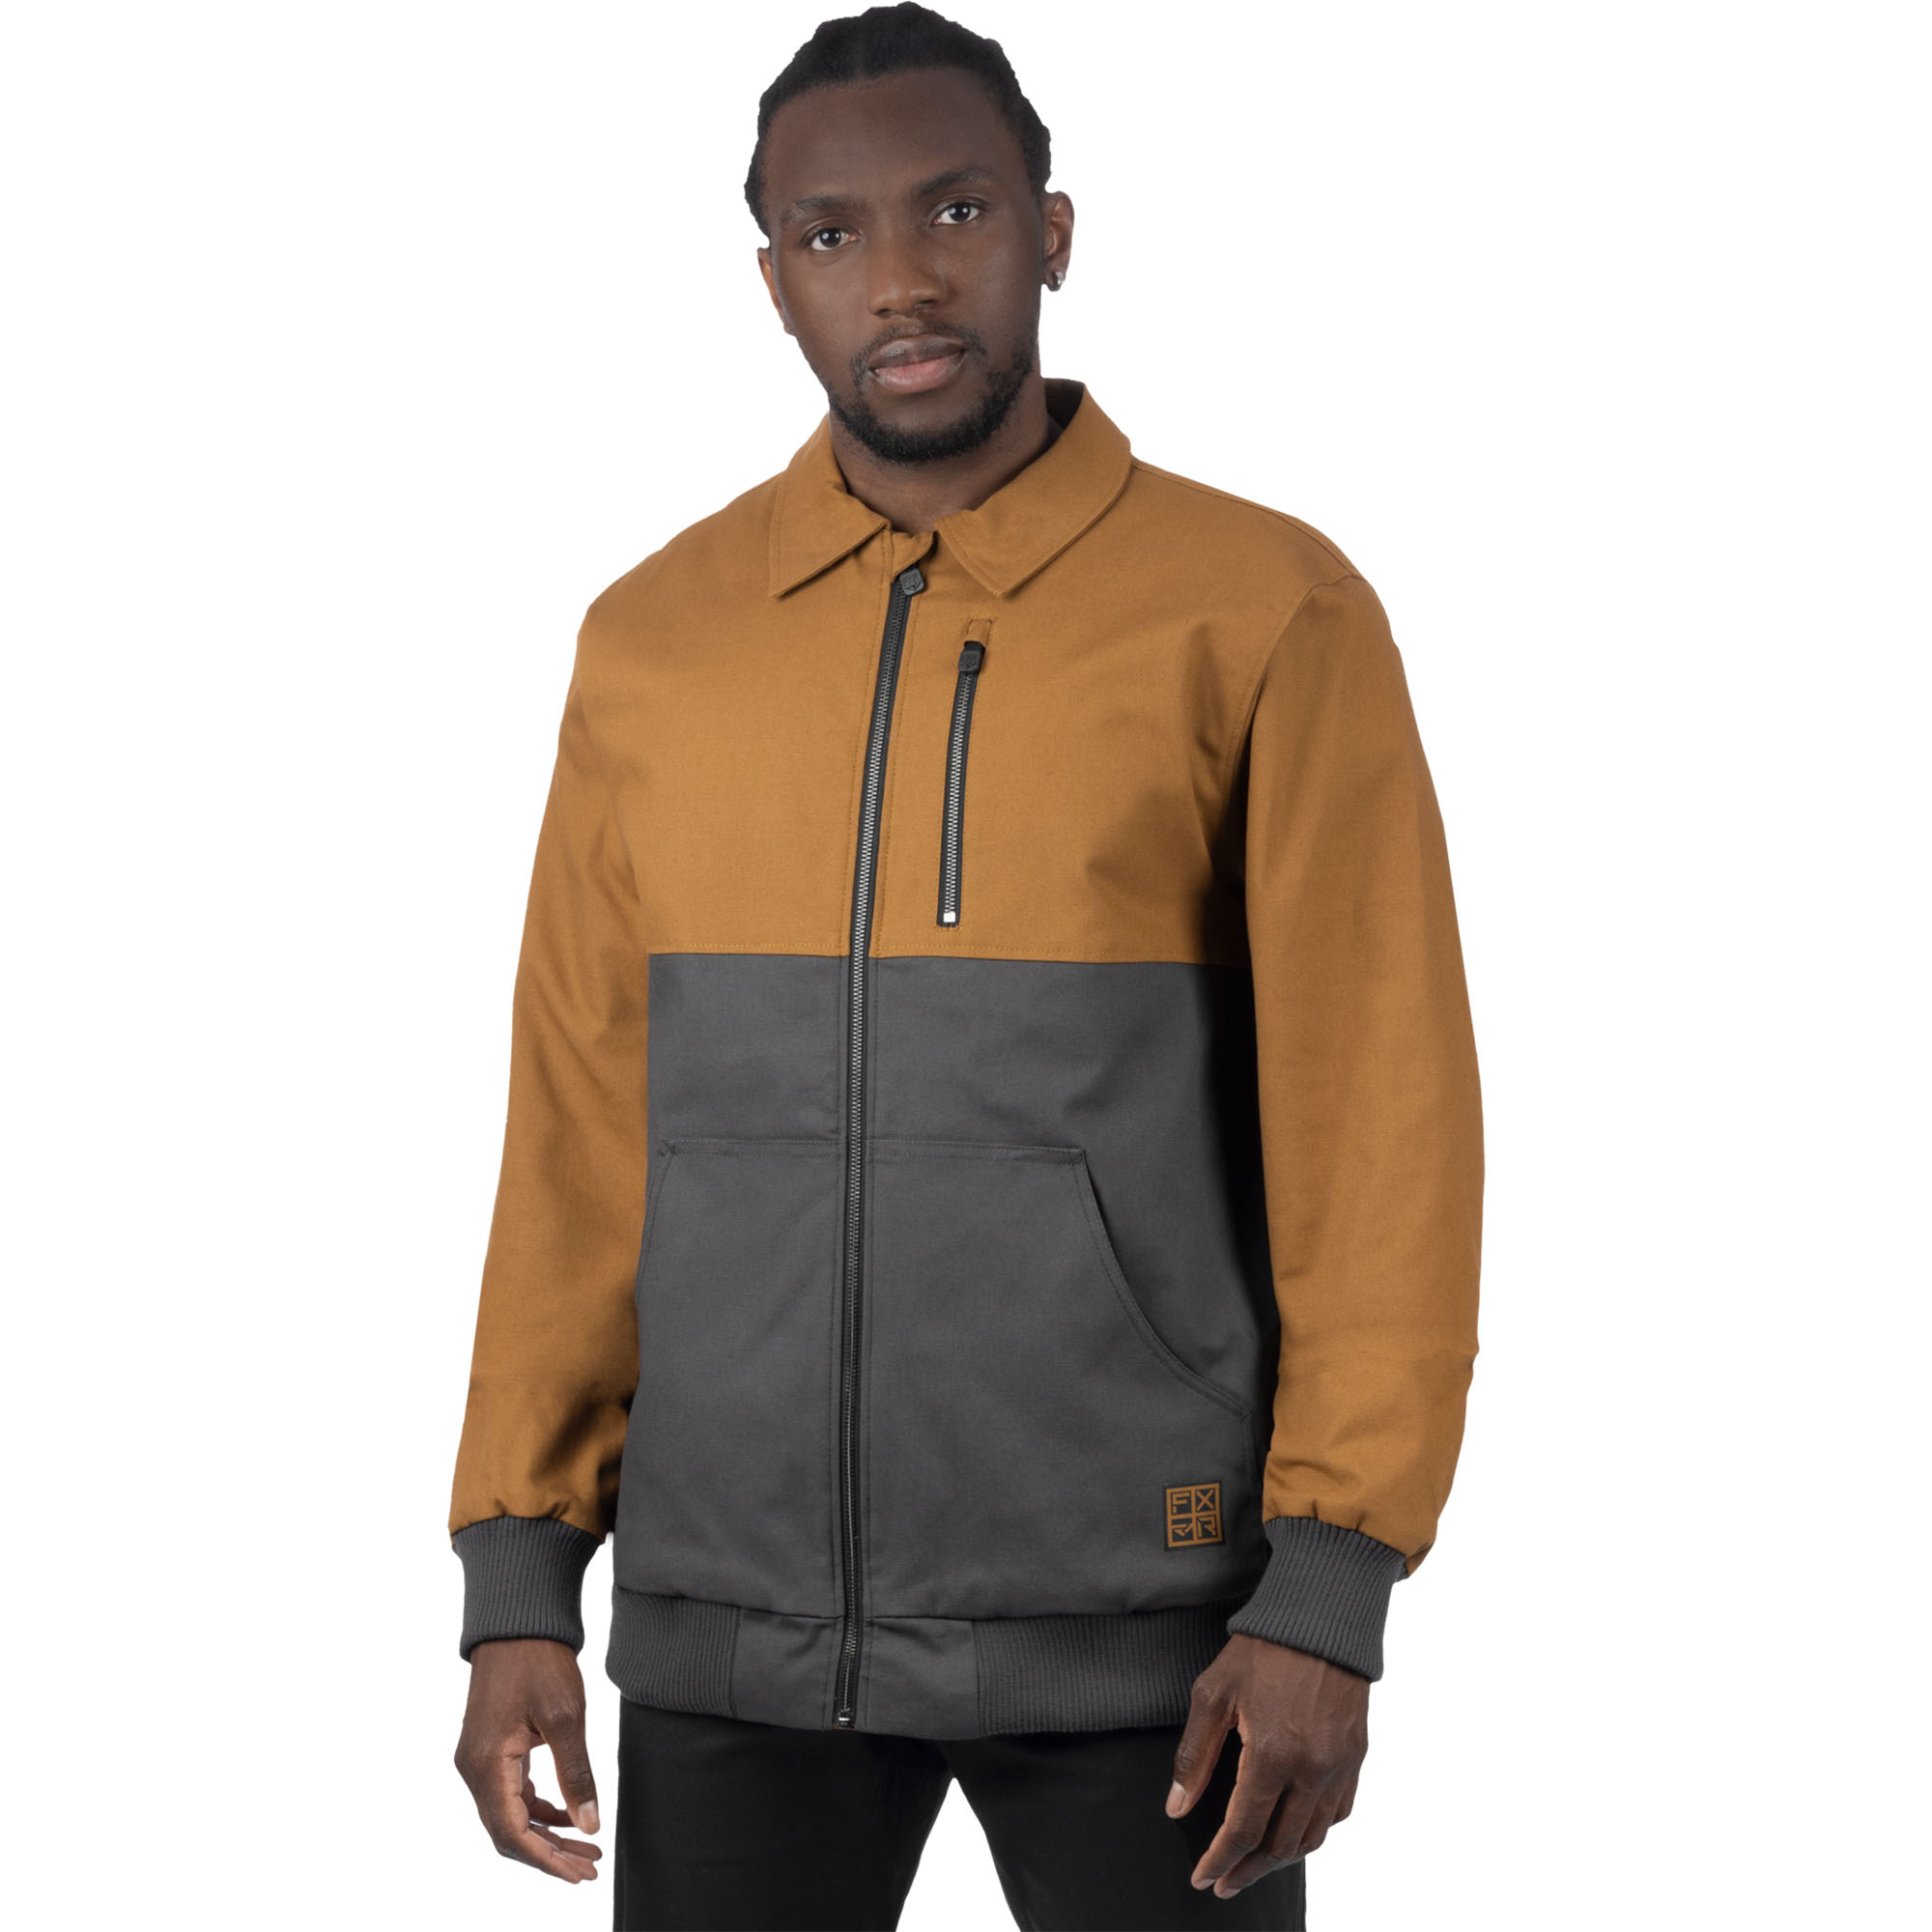 Canvas Winter Jackets – Matts OffRoad Recovery